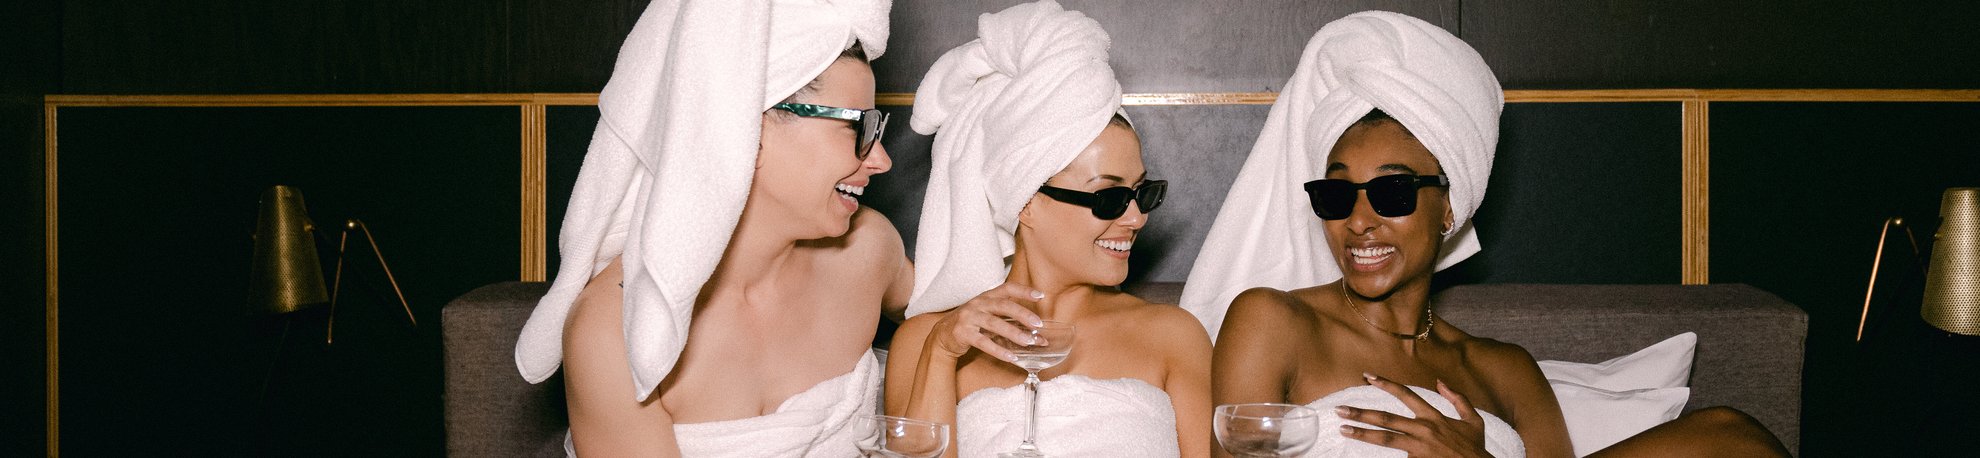 three girls holding a glass of champagne with chandon bottle in a jovial mood, interacting and smiling, and celebrate together at the emily hotel